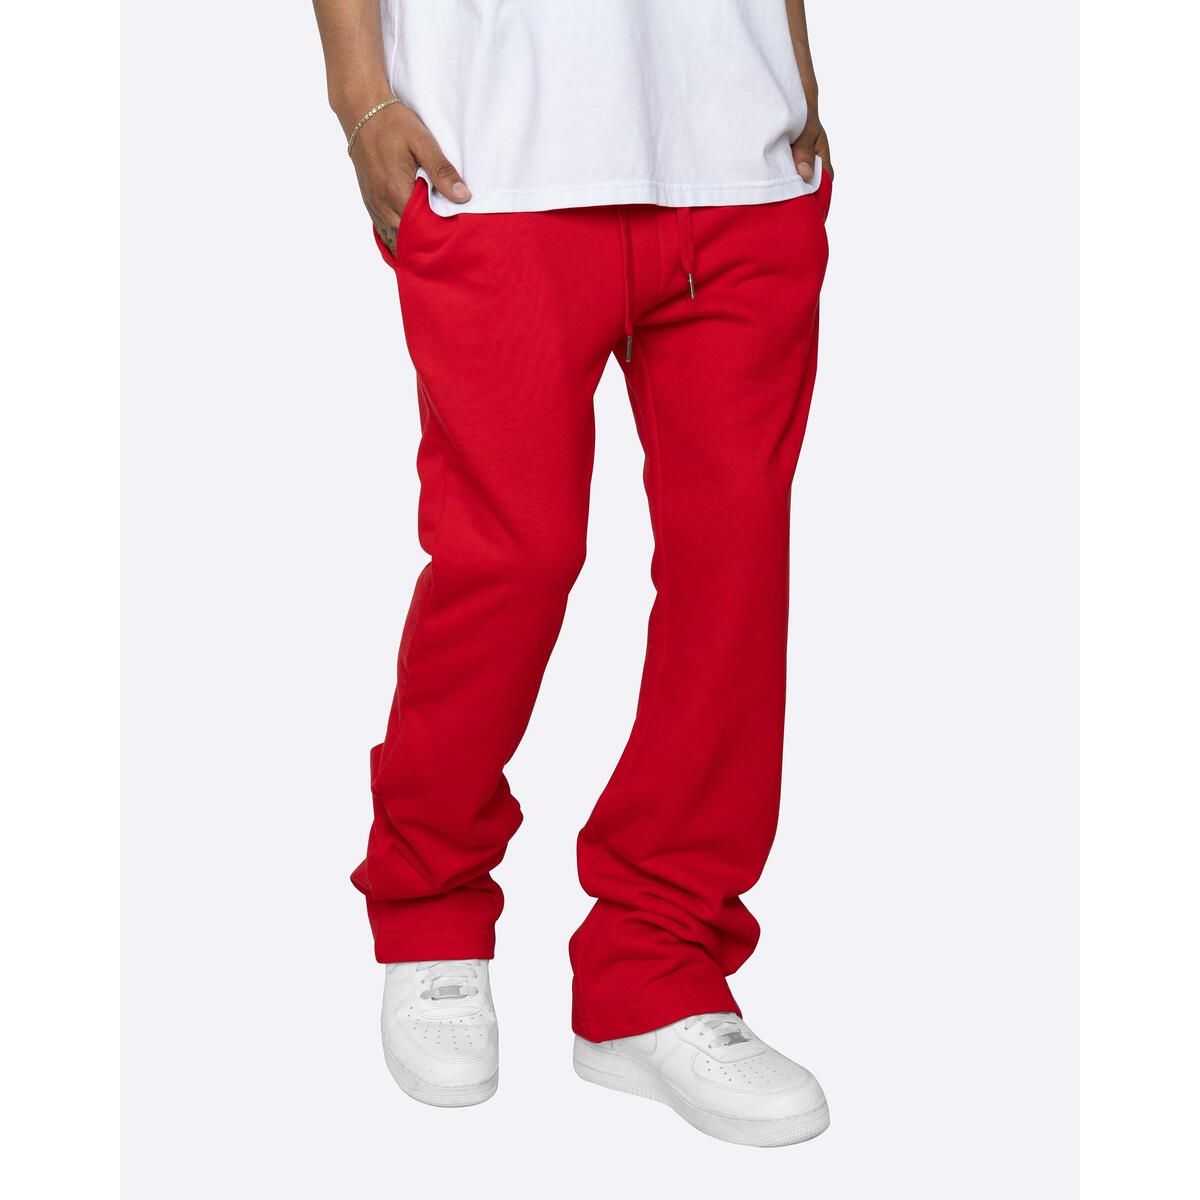 EPTM French Terry Flare Pants - Red (EP11000)